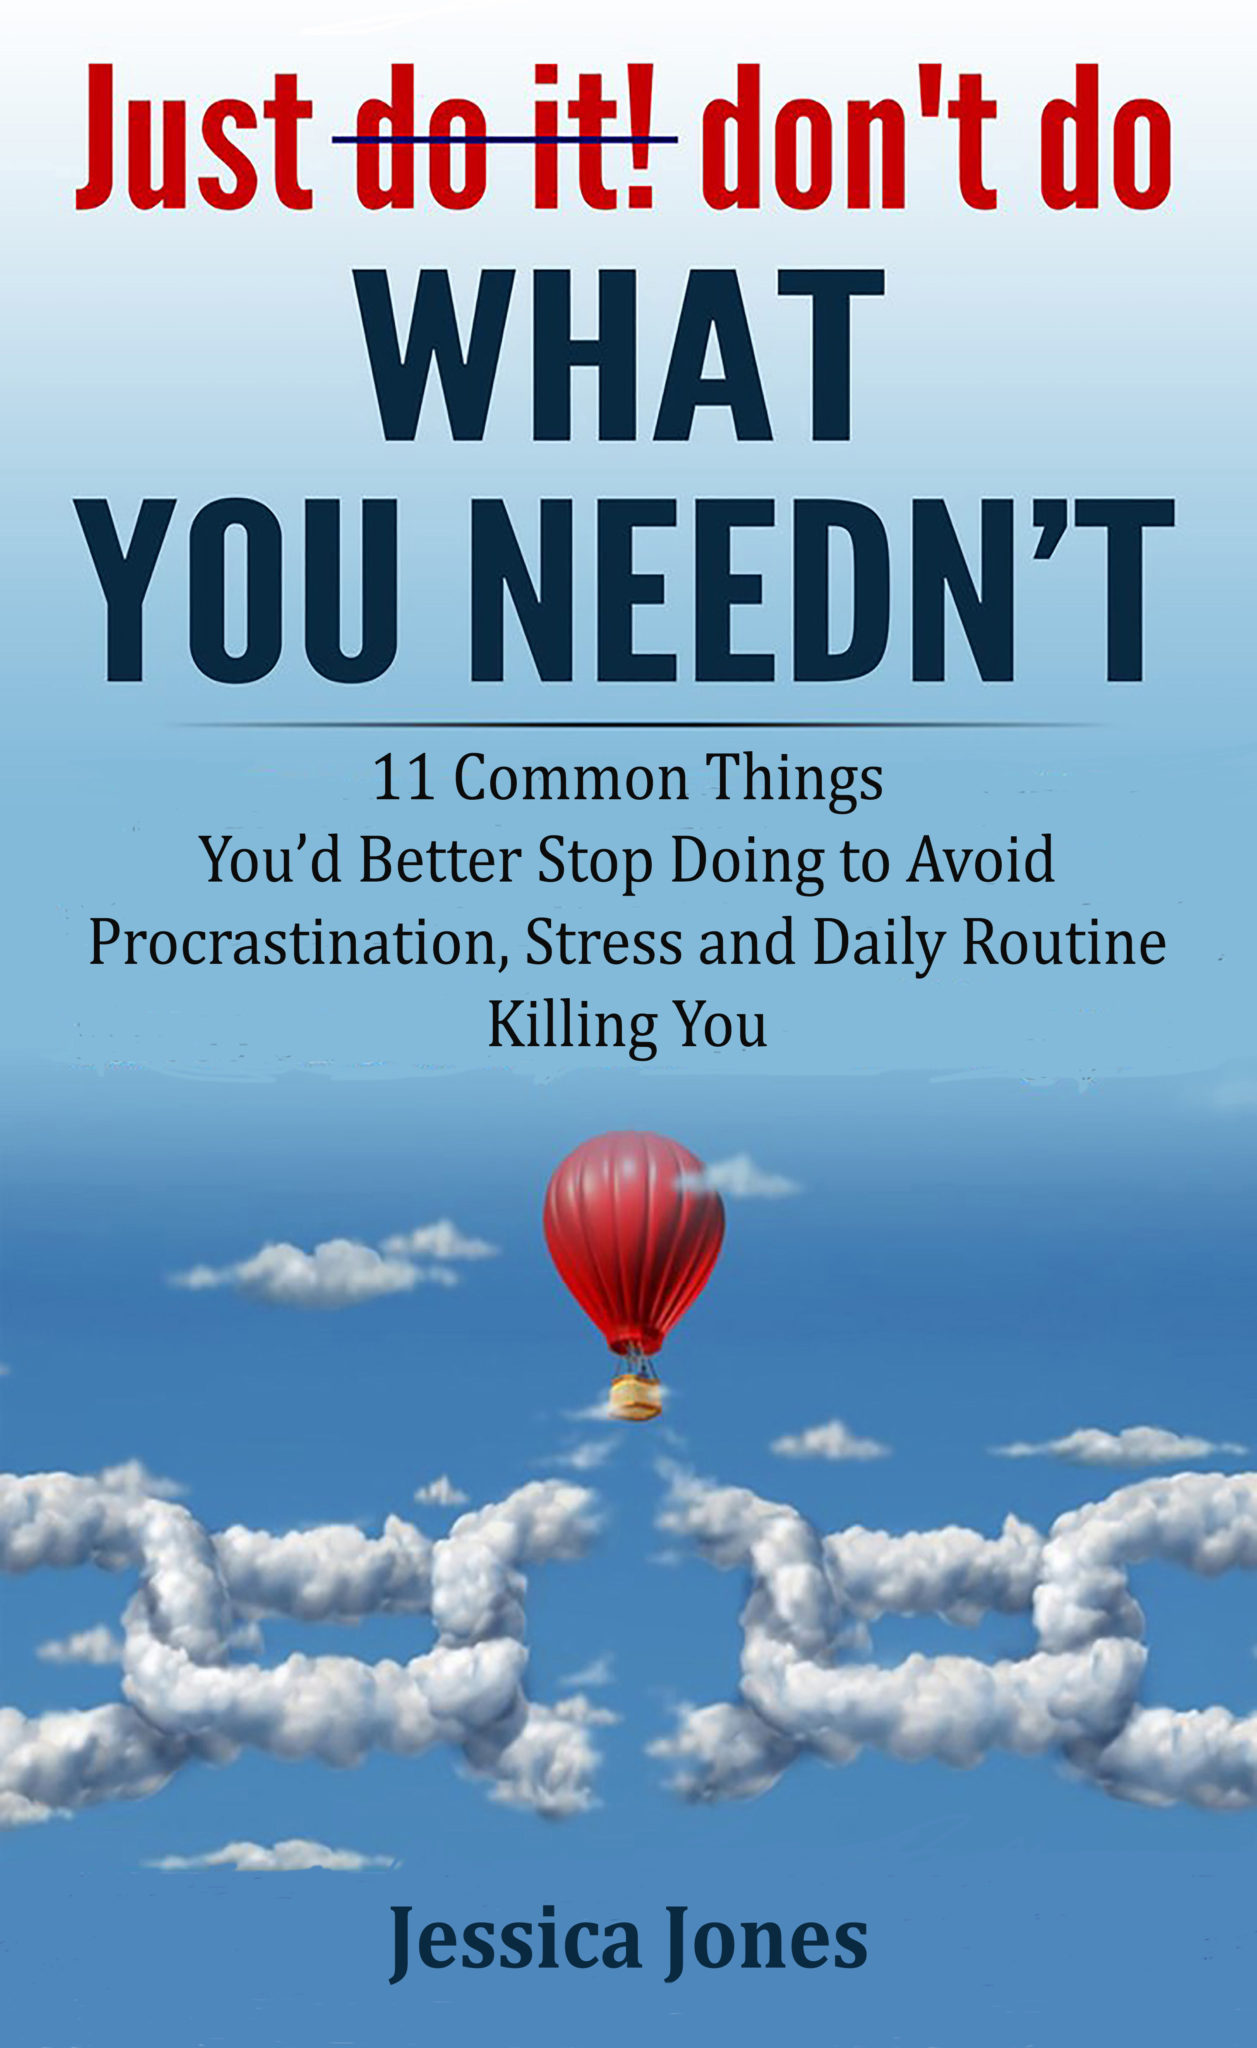 FREE: Just Don’t Do What You Needn’t: 11 Common Things You’d Better Stop Doing to Avoid Procrastination, Stress and Daily Routine Killing You by Jessica Jones